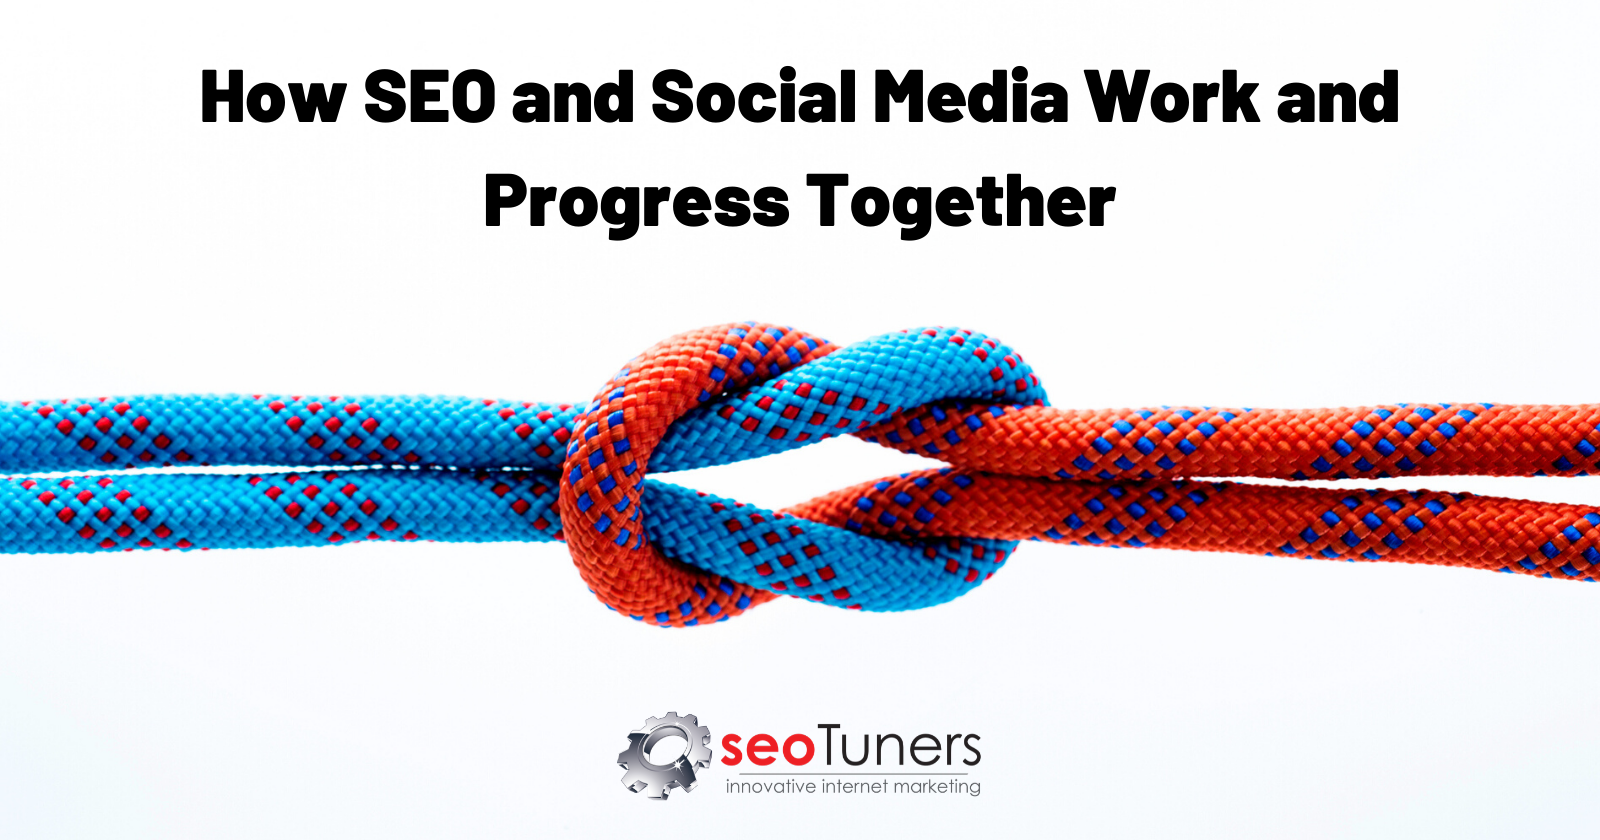 How Social Media and SEO Work and Progress Together